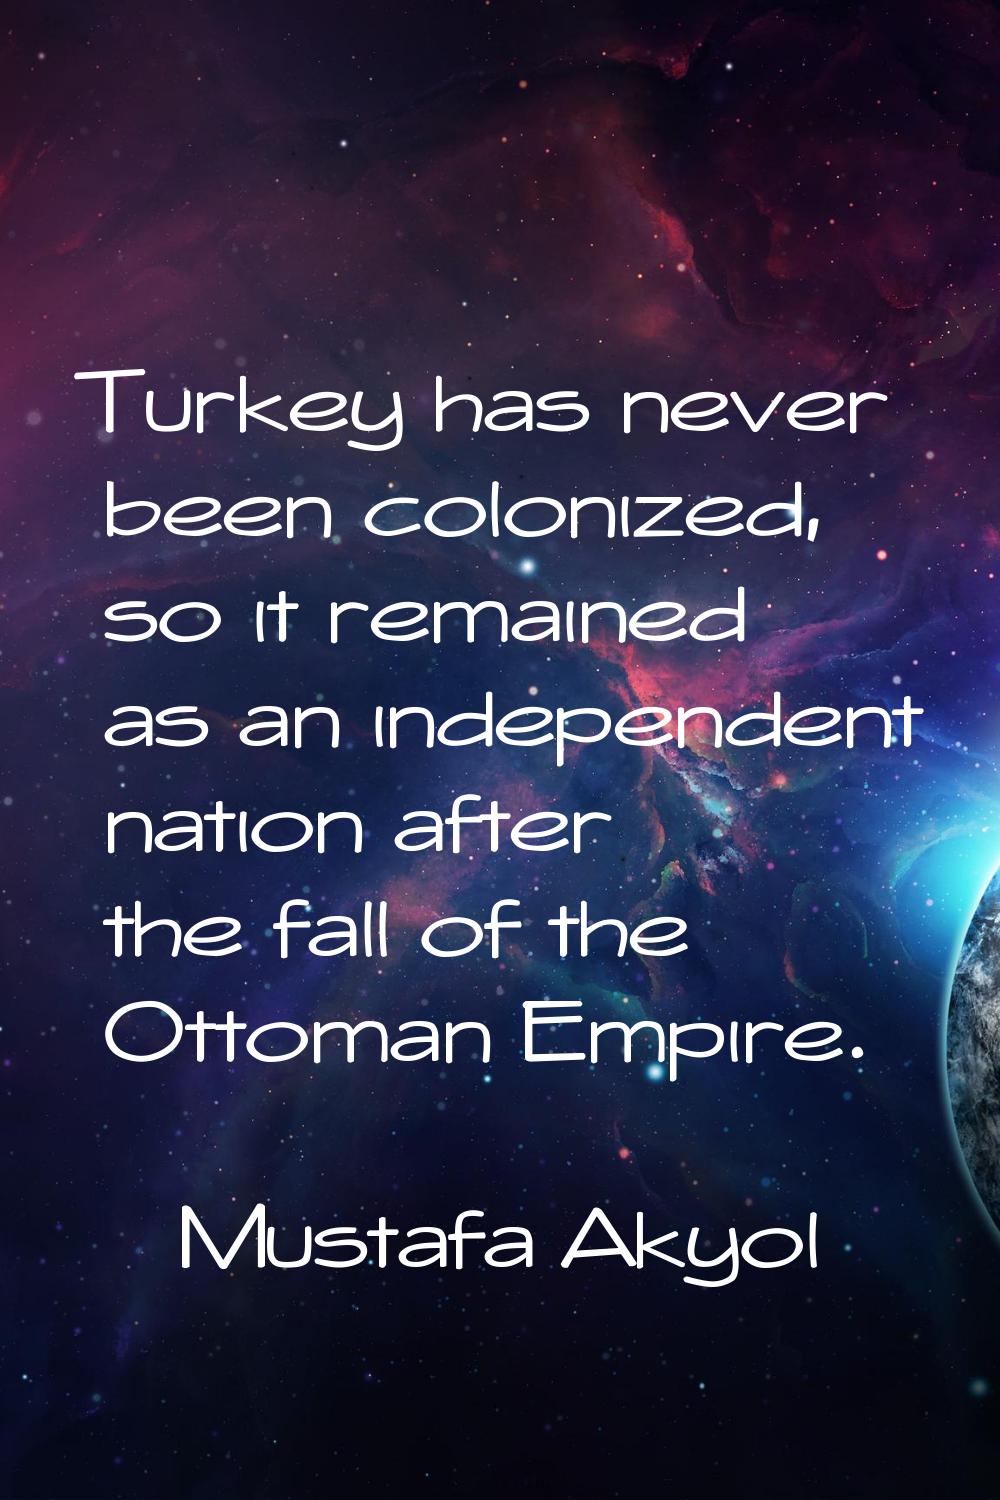 Turkey has never been colonized, so it remained as an independent nation after the fall of the Otto